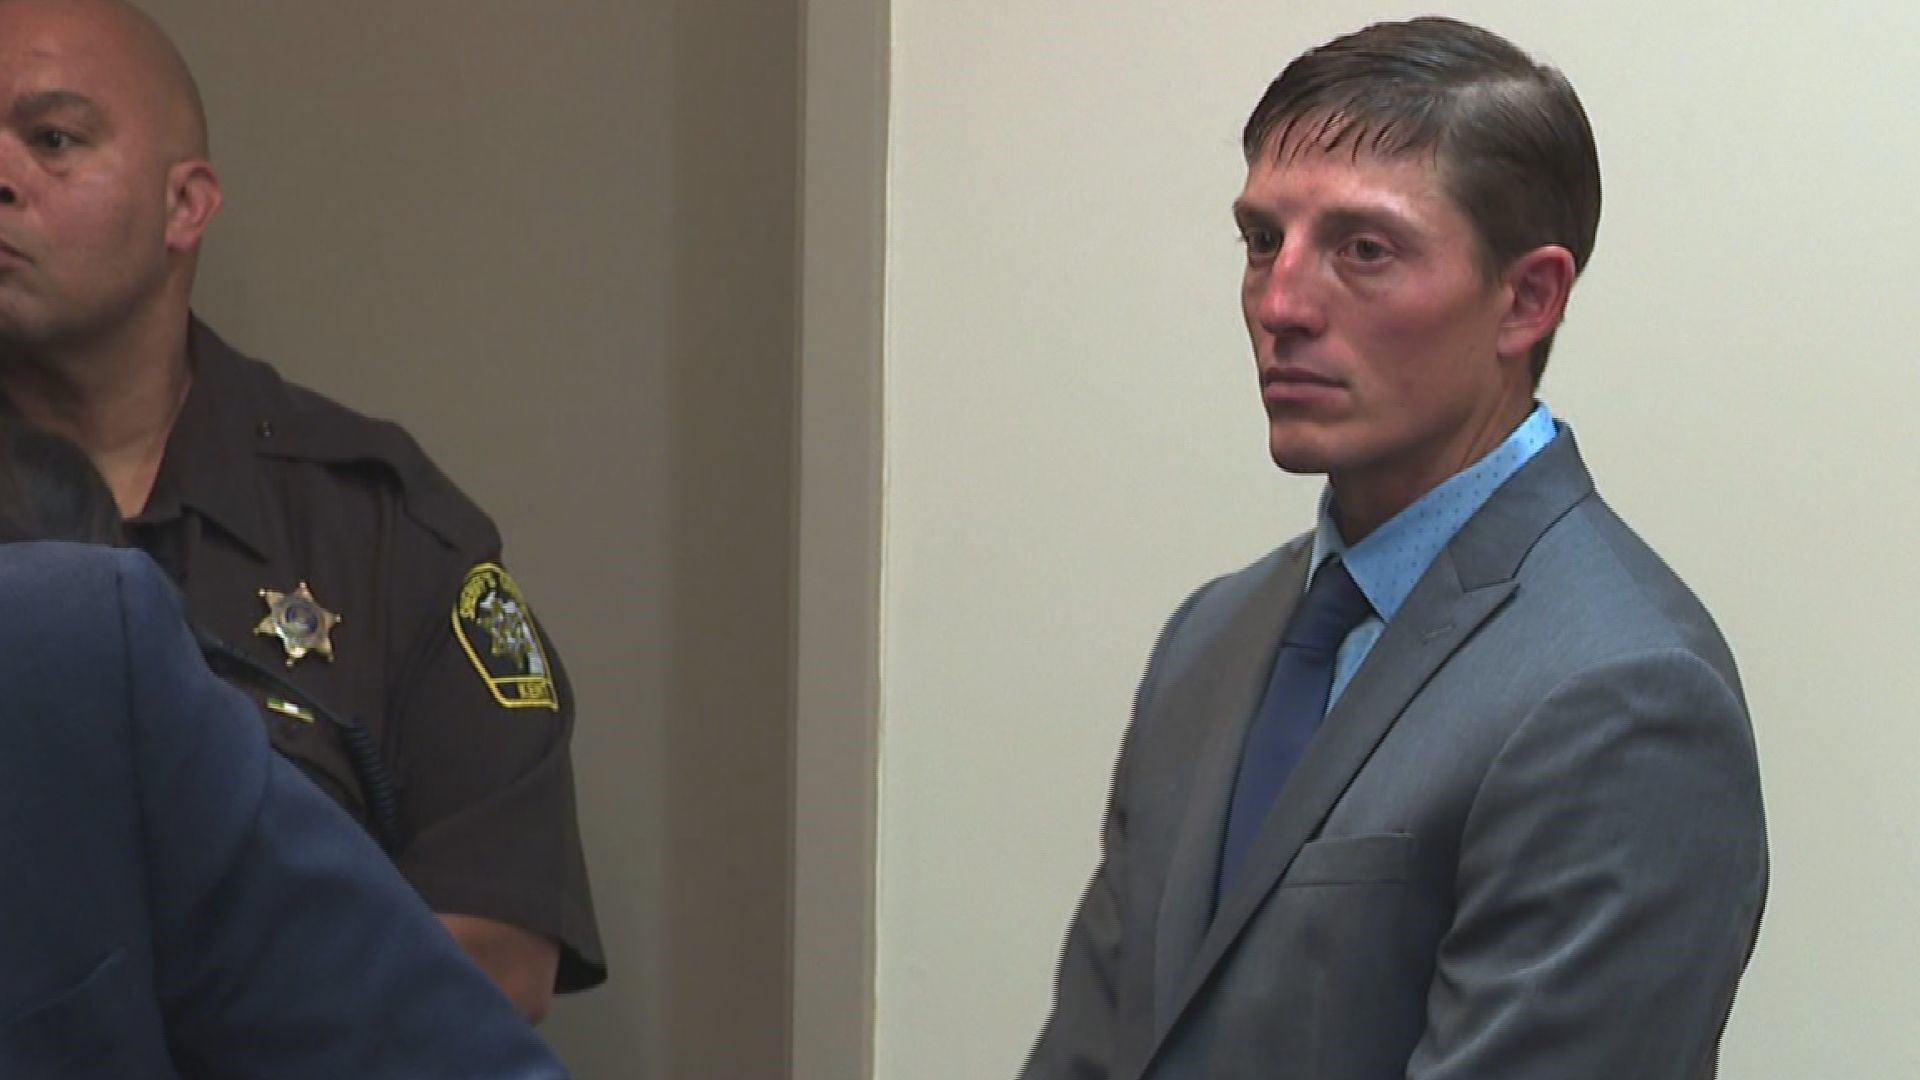 Attorneys say former GRPD Officer Christopher Schurr was justified in killing Patrick Lyoya, and ask for the 2nd-degree murder charge to be dismissed.